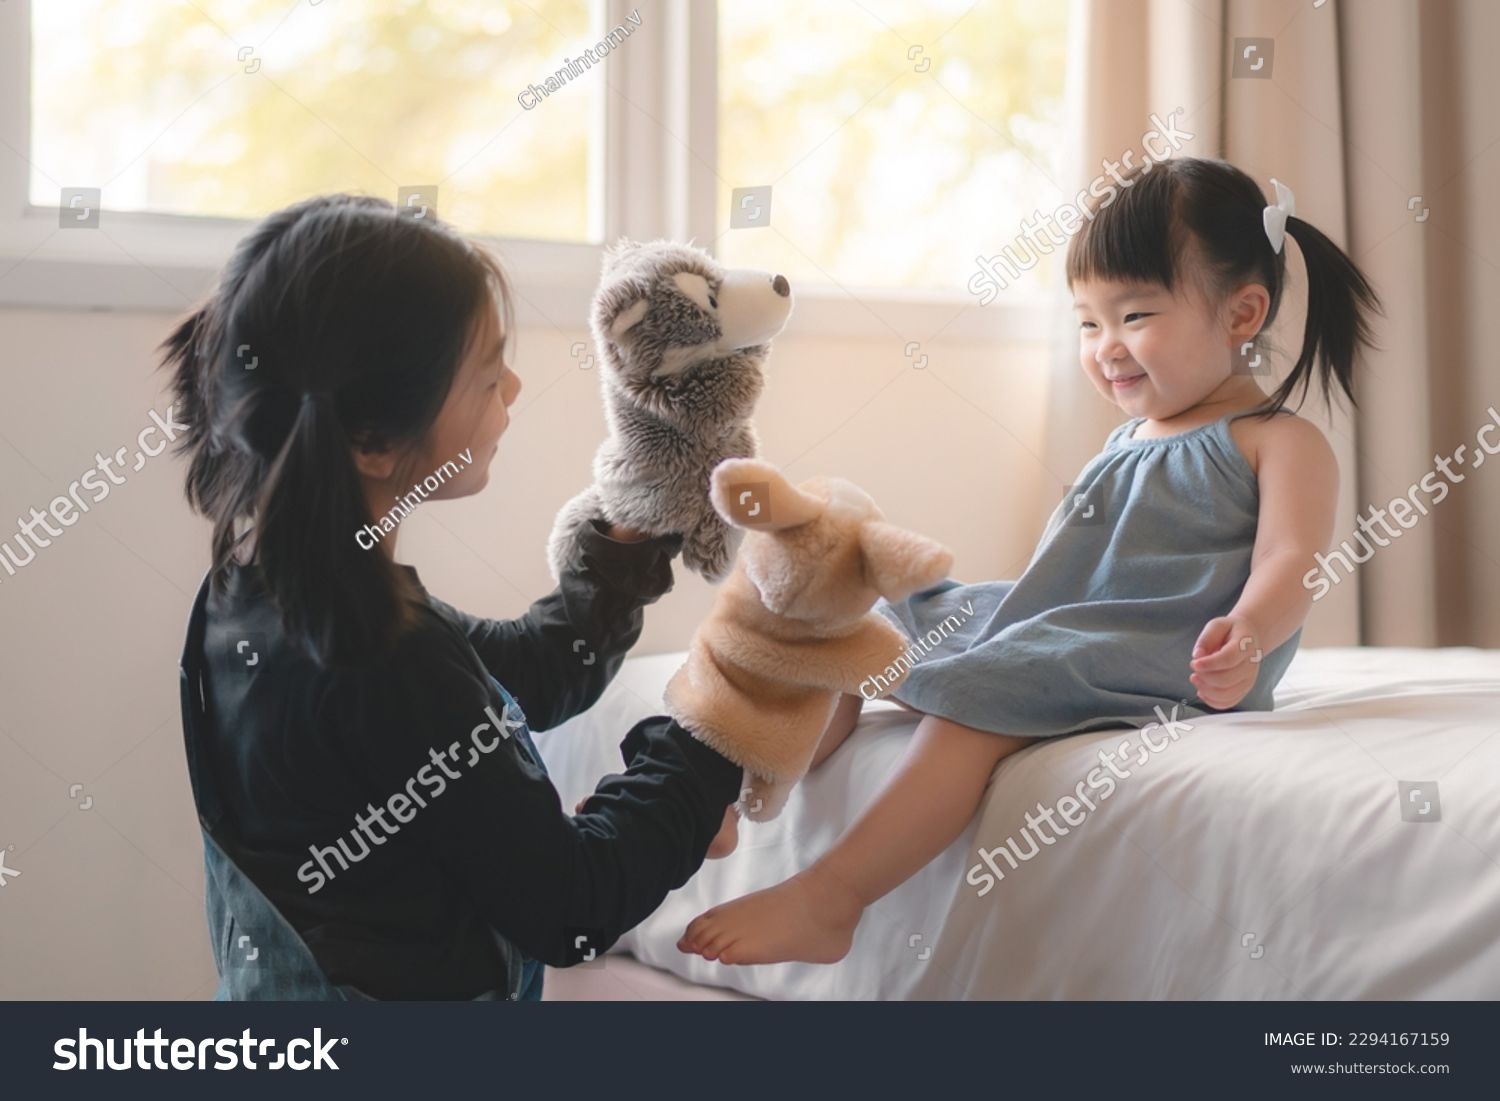 Elder asian sister and younger Asian sister playing animal hand puppet doll toys, sitting on bed, Educational preschool games, Having fun with kid at home concept.; #2294167159